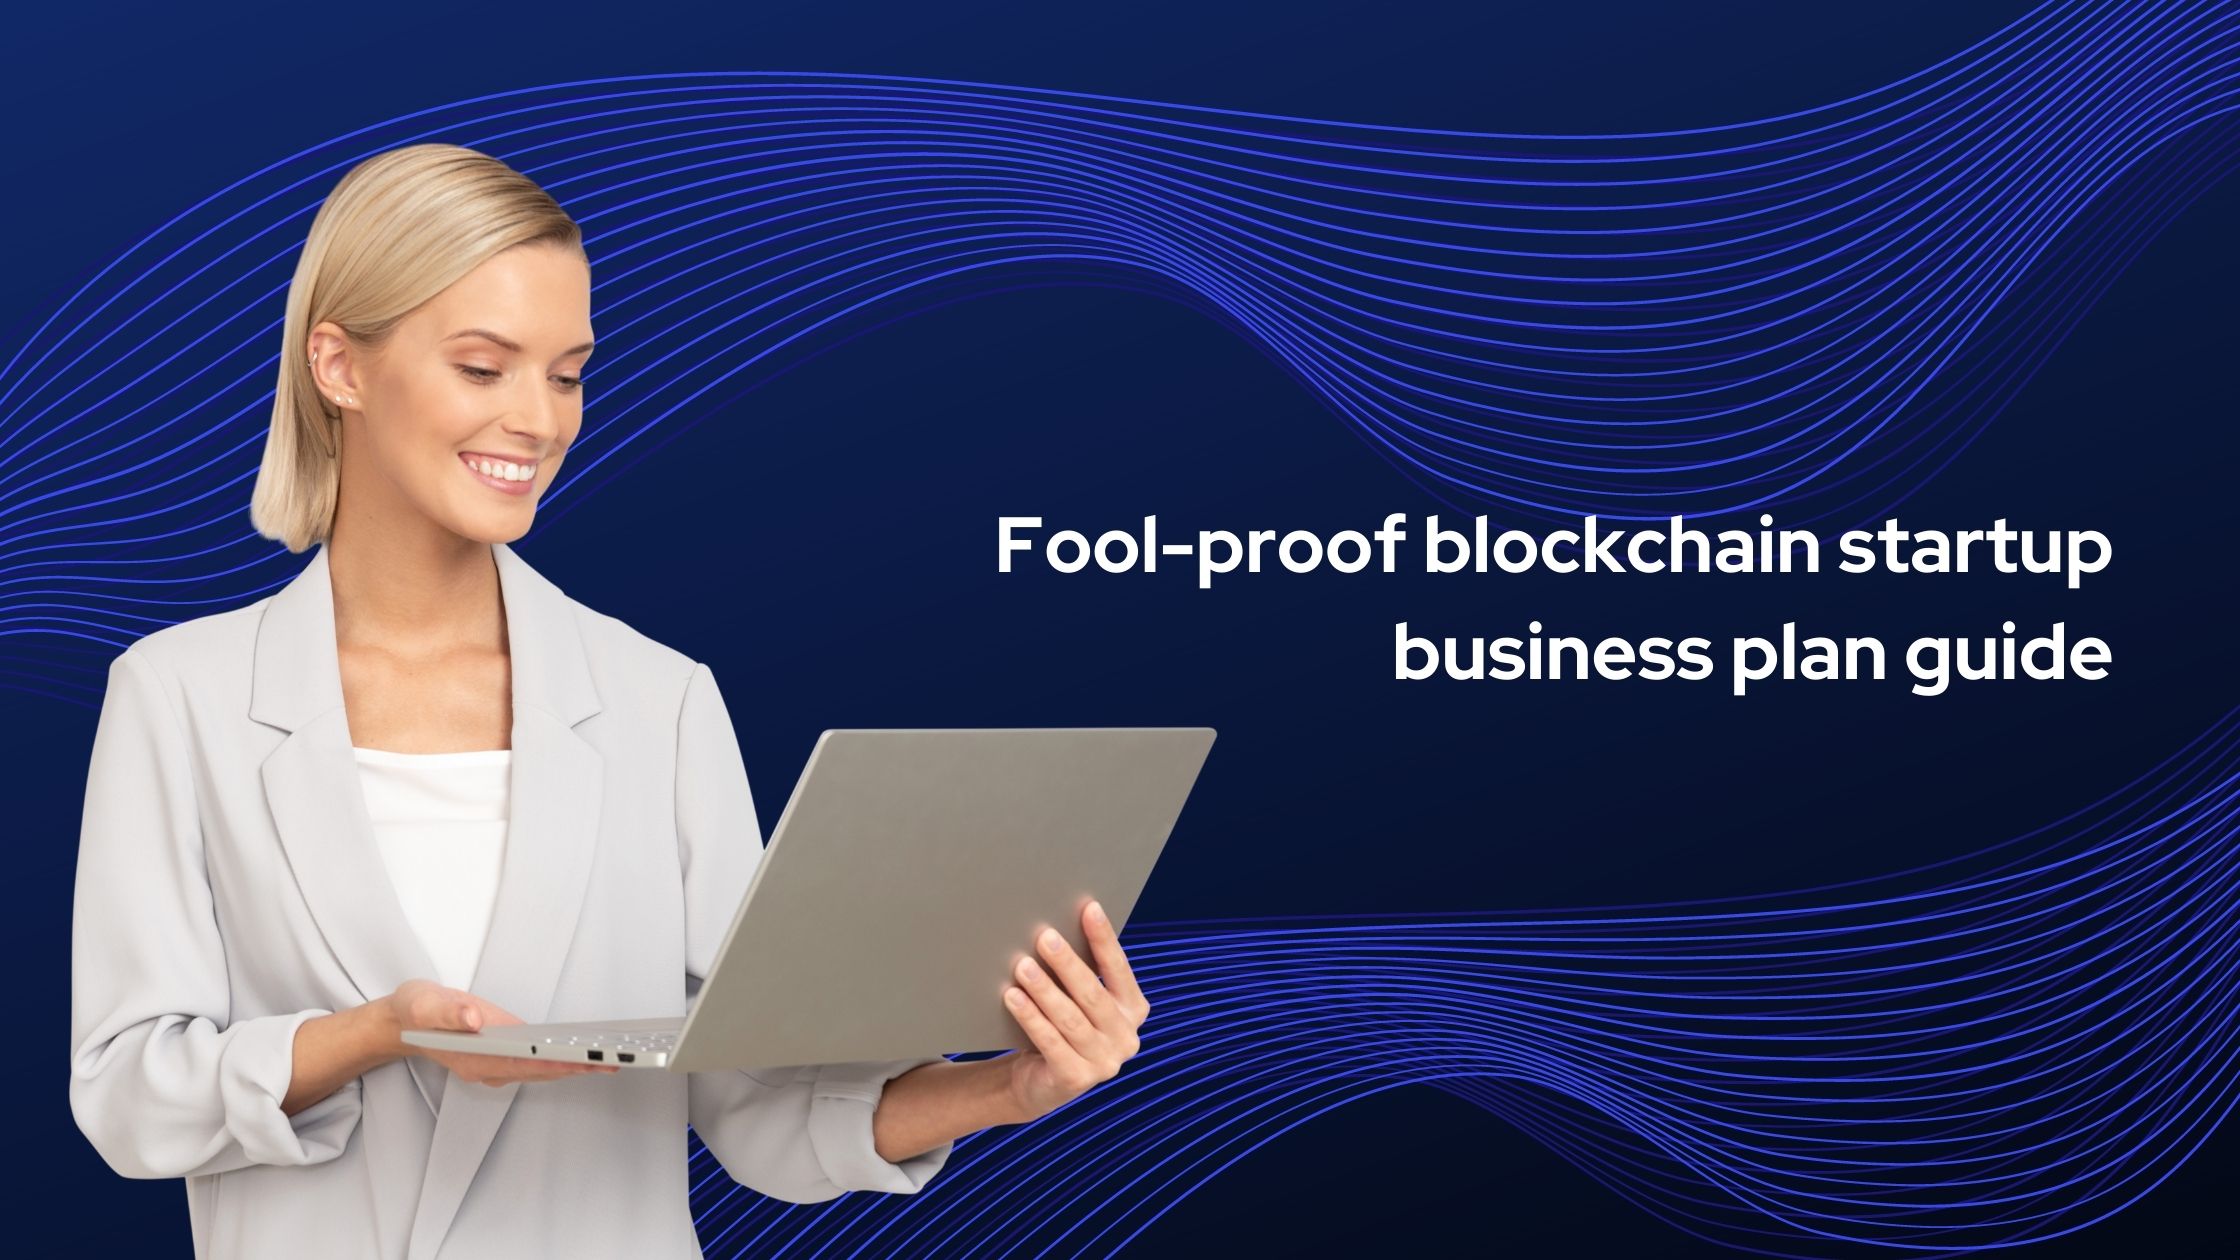 Fool-proof blockchain startup business plan guide